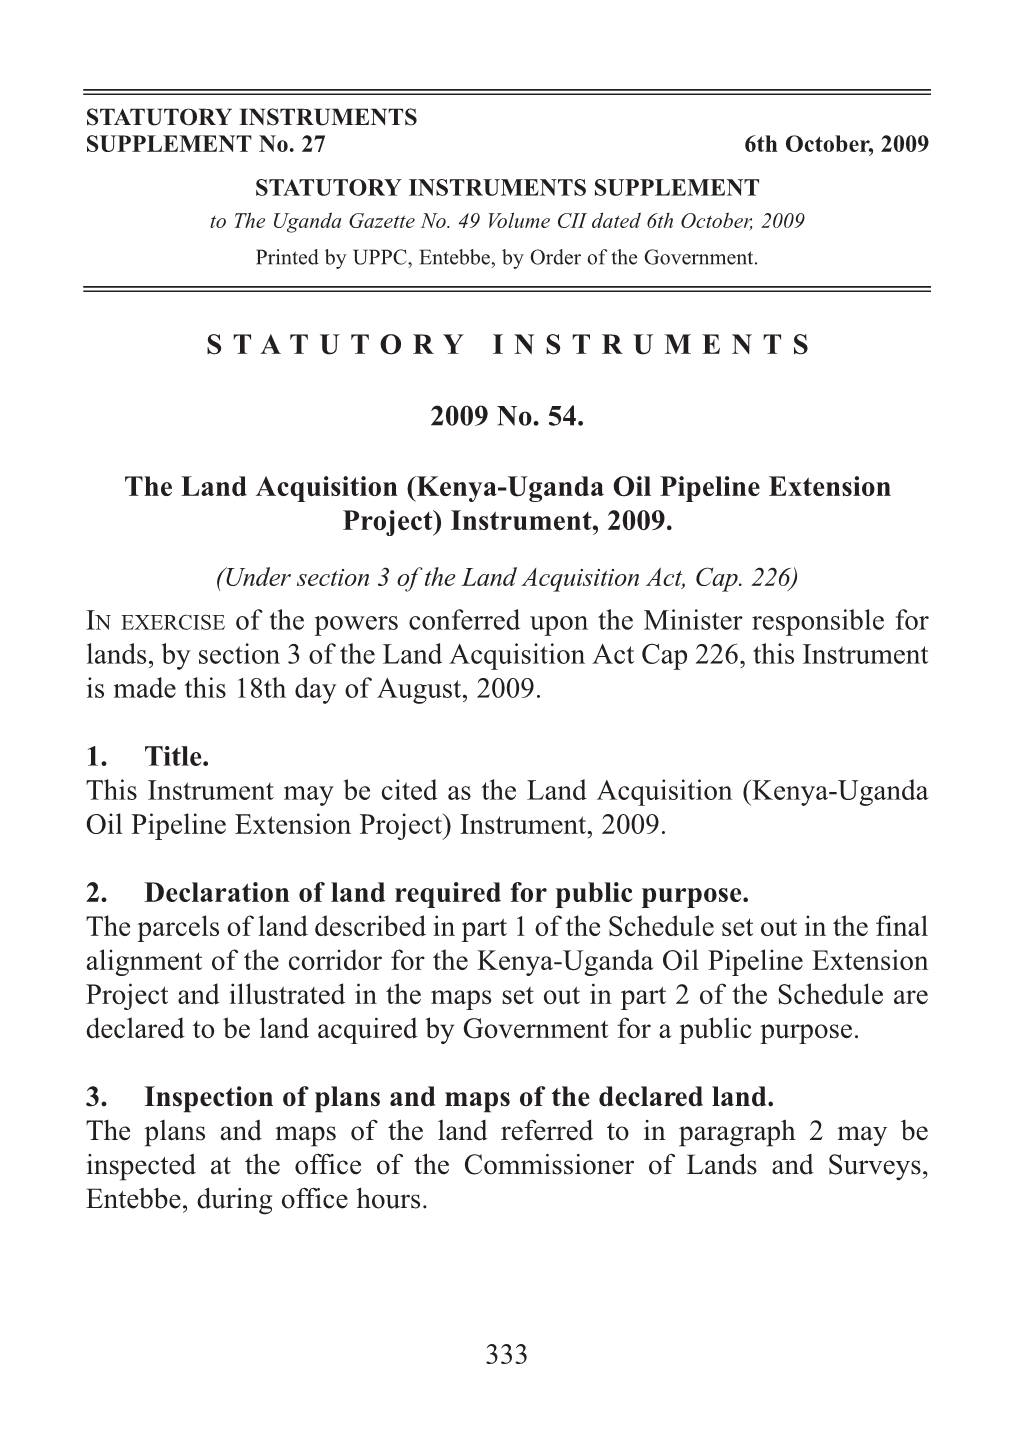 STATUTORY INSTRUMENTS 2009 No. 54. the Land Acquisition (Kenya-Uganda Oil Pipeline Extension Project) Instrument, 2009. in EXERC